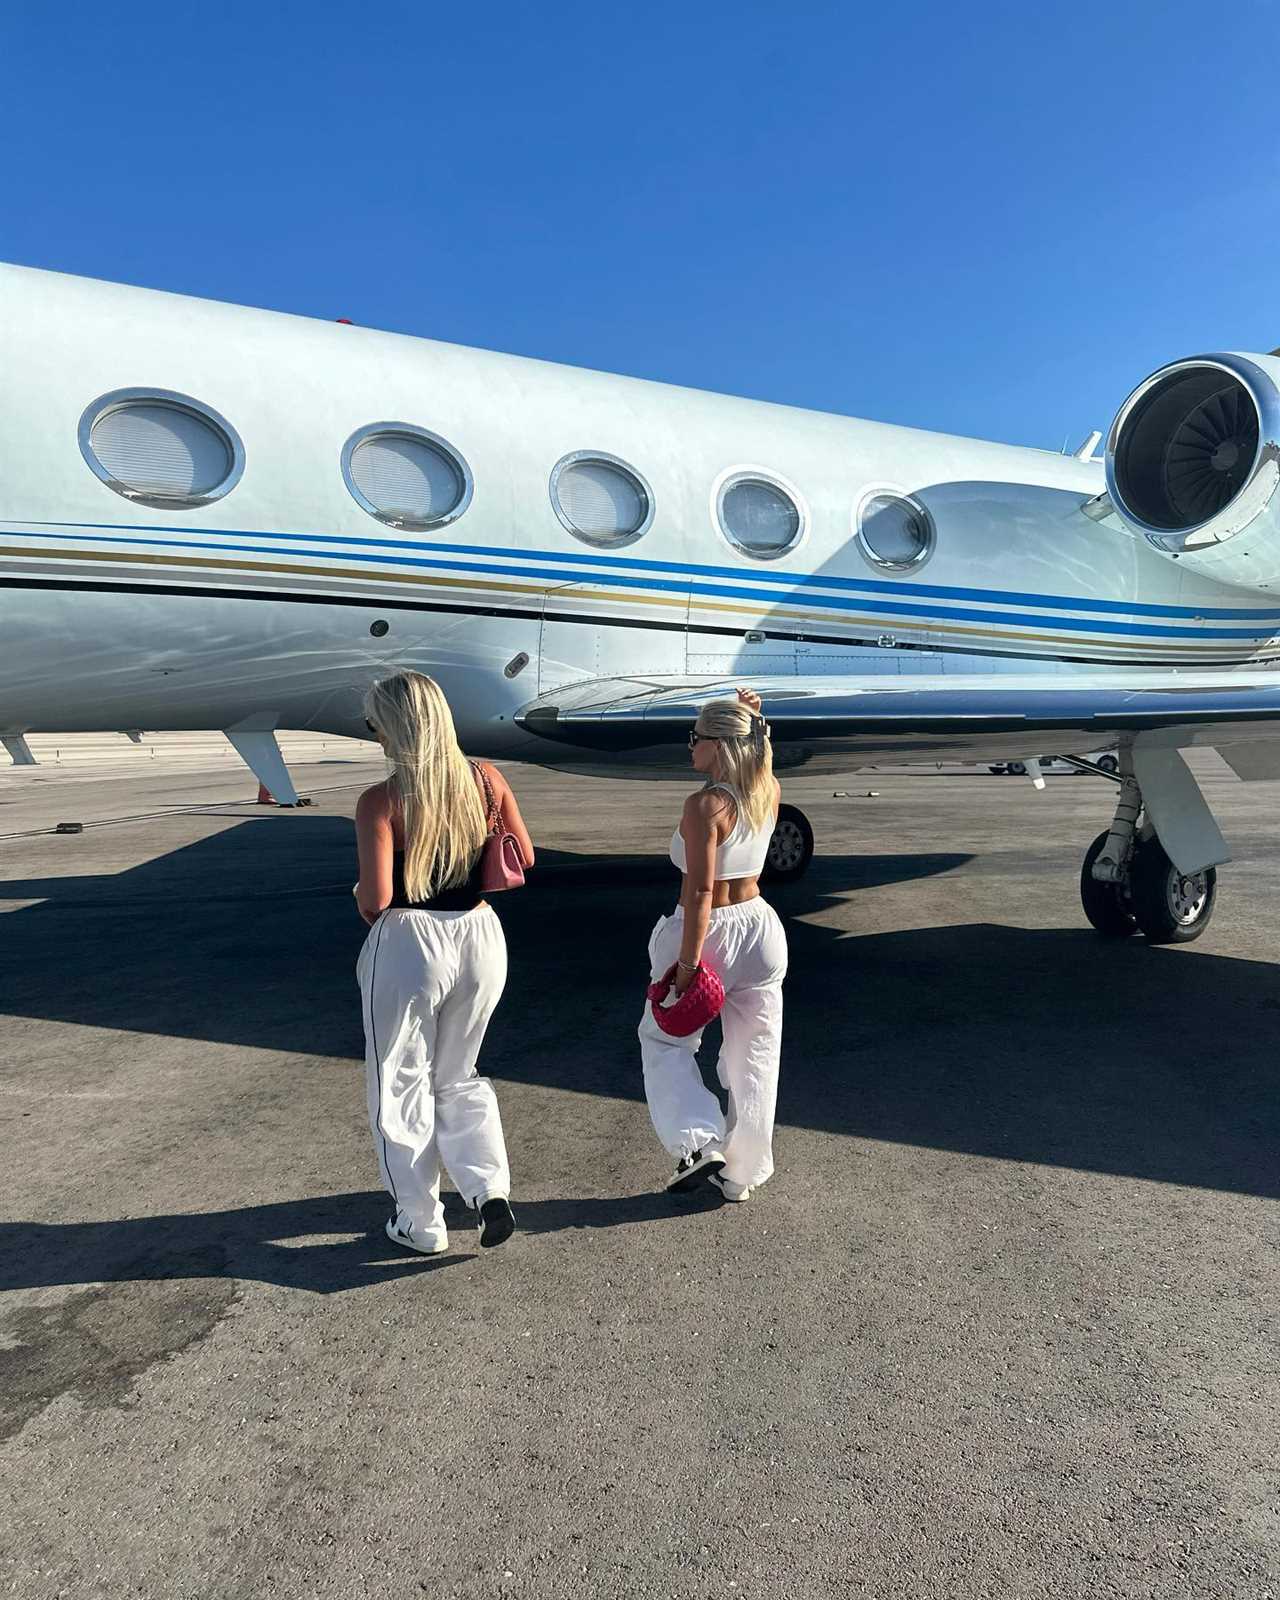 Love Island’s Ellie Brown wows in bikini as she boards private jet with co-star